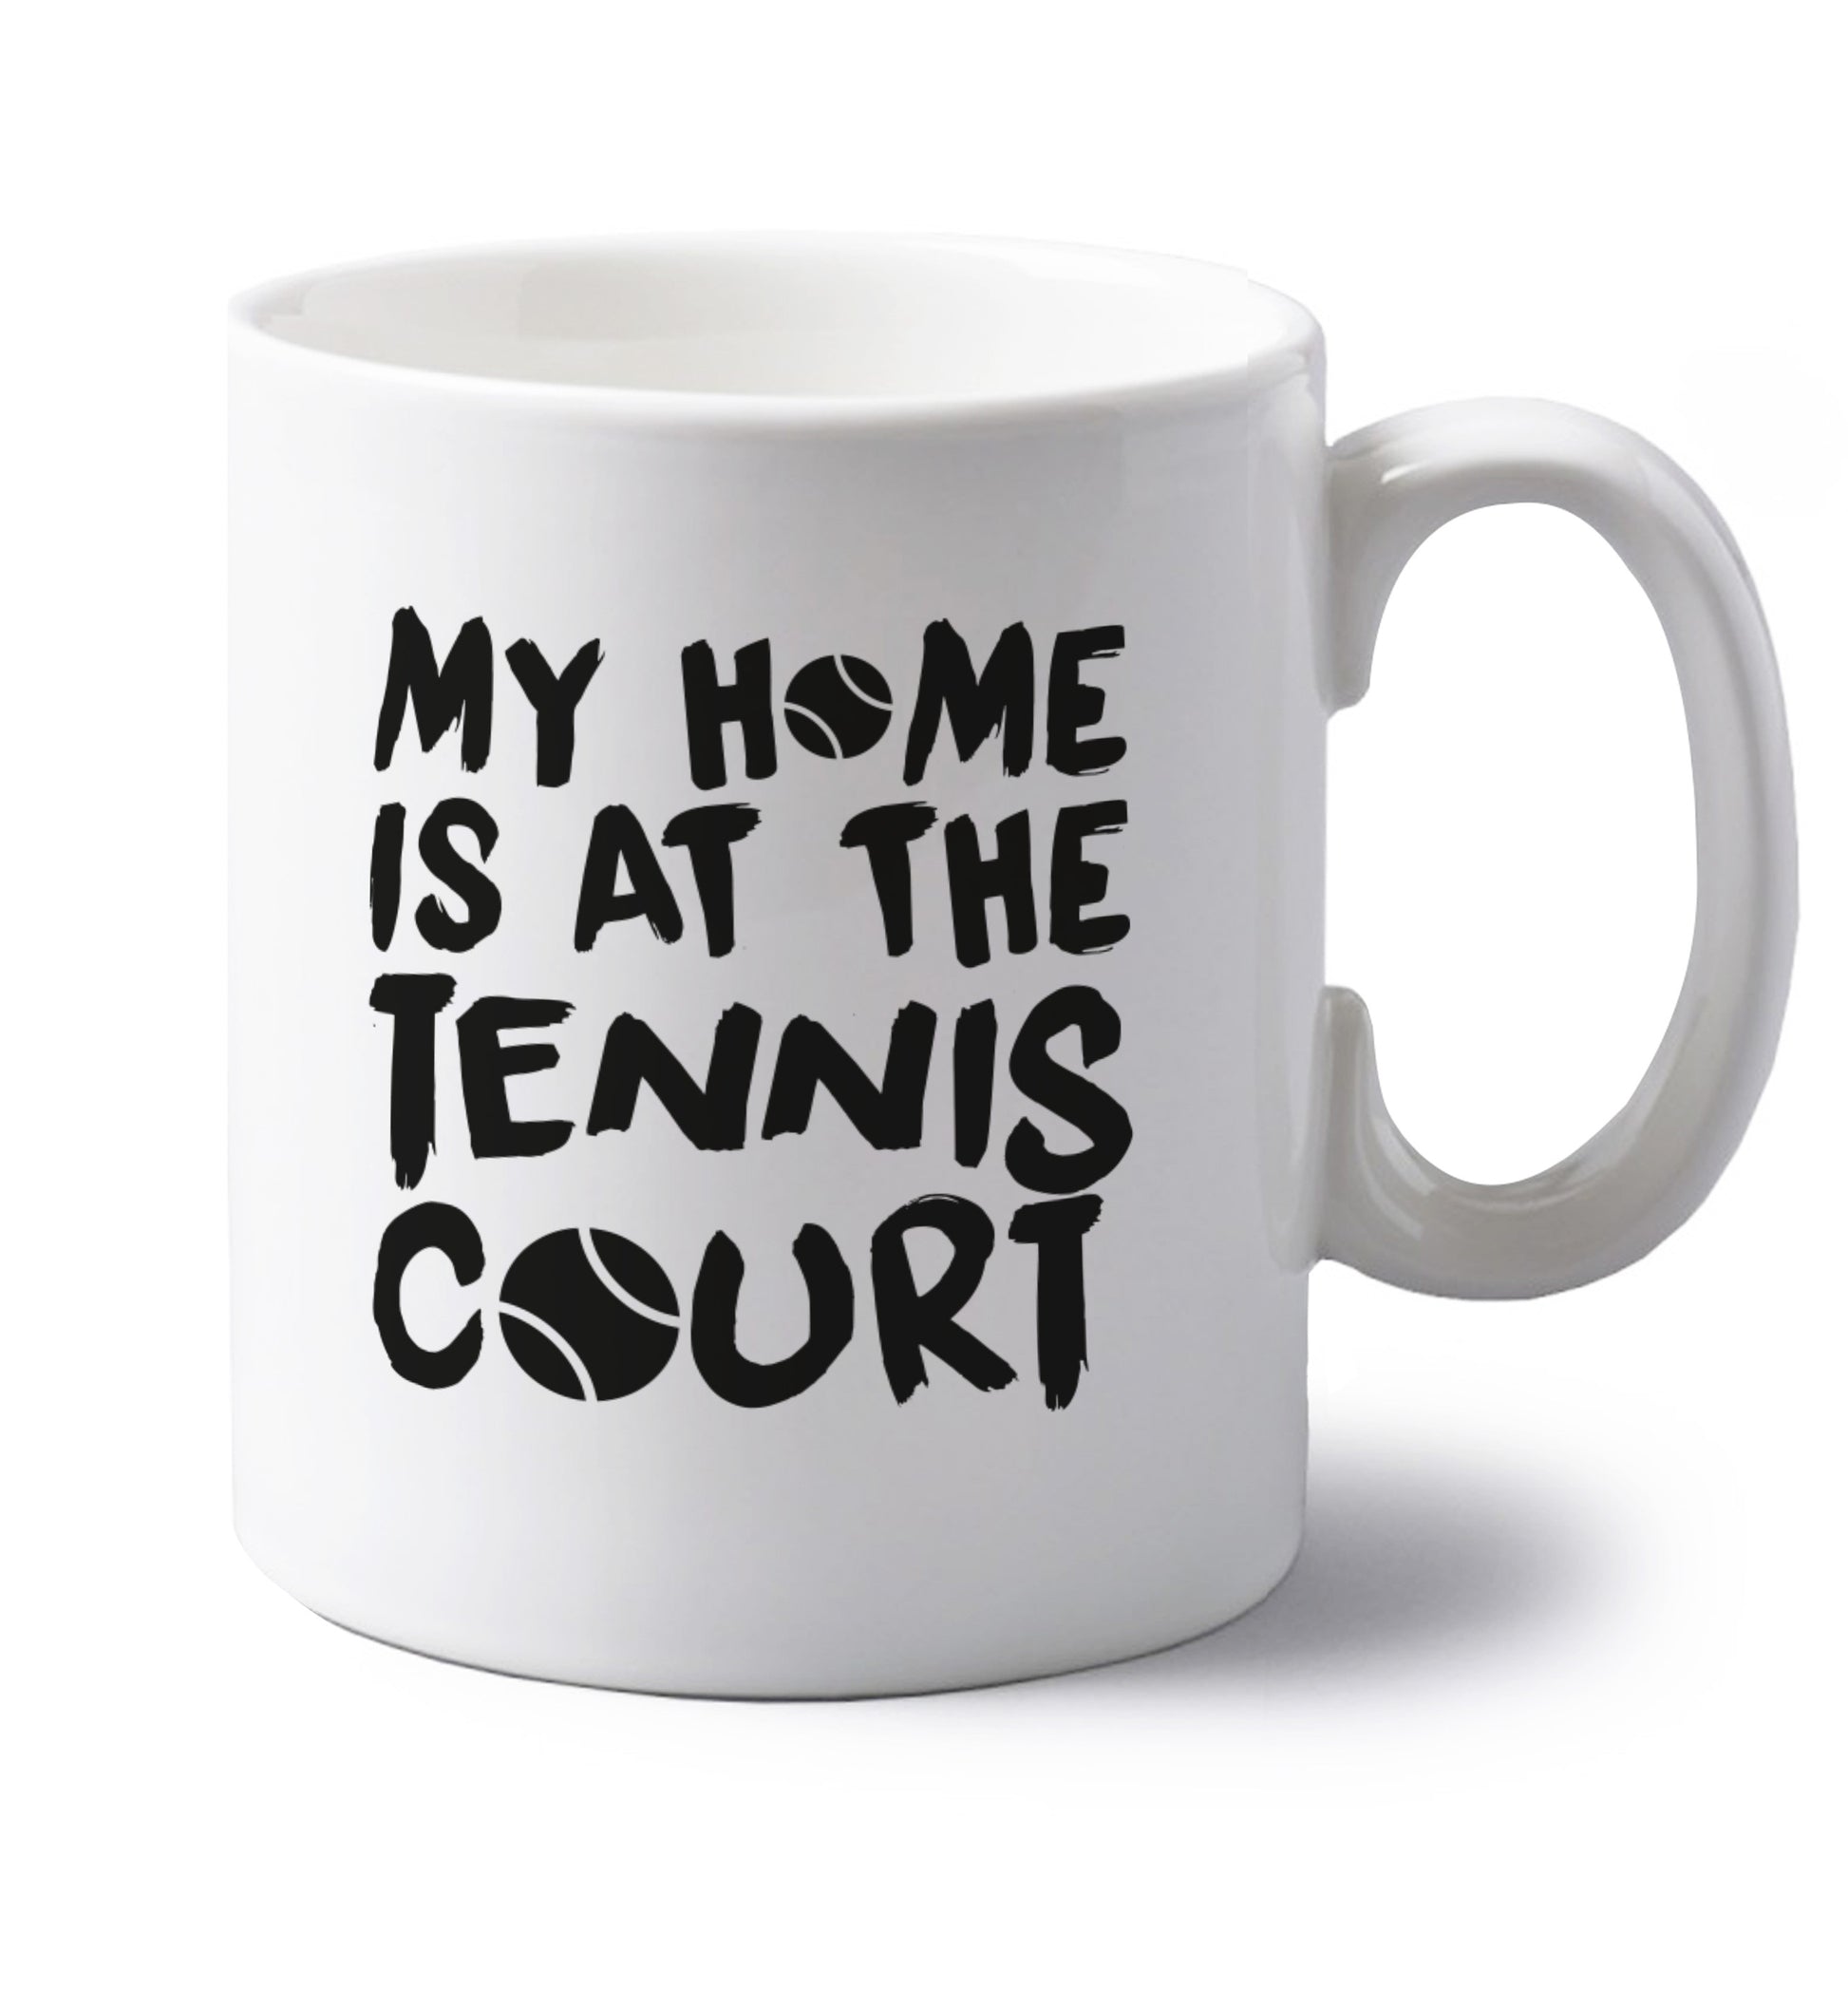 My home is at the tennis court left handed white ceramic mug 